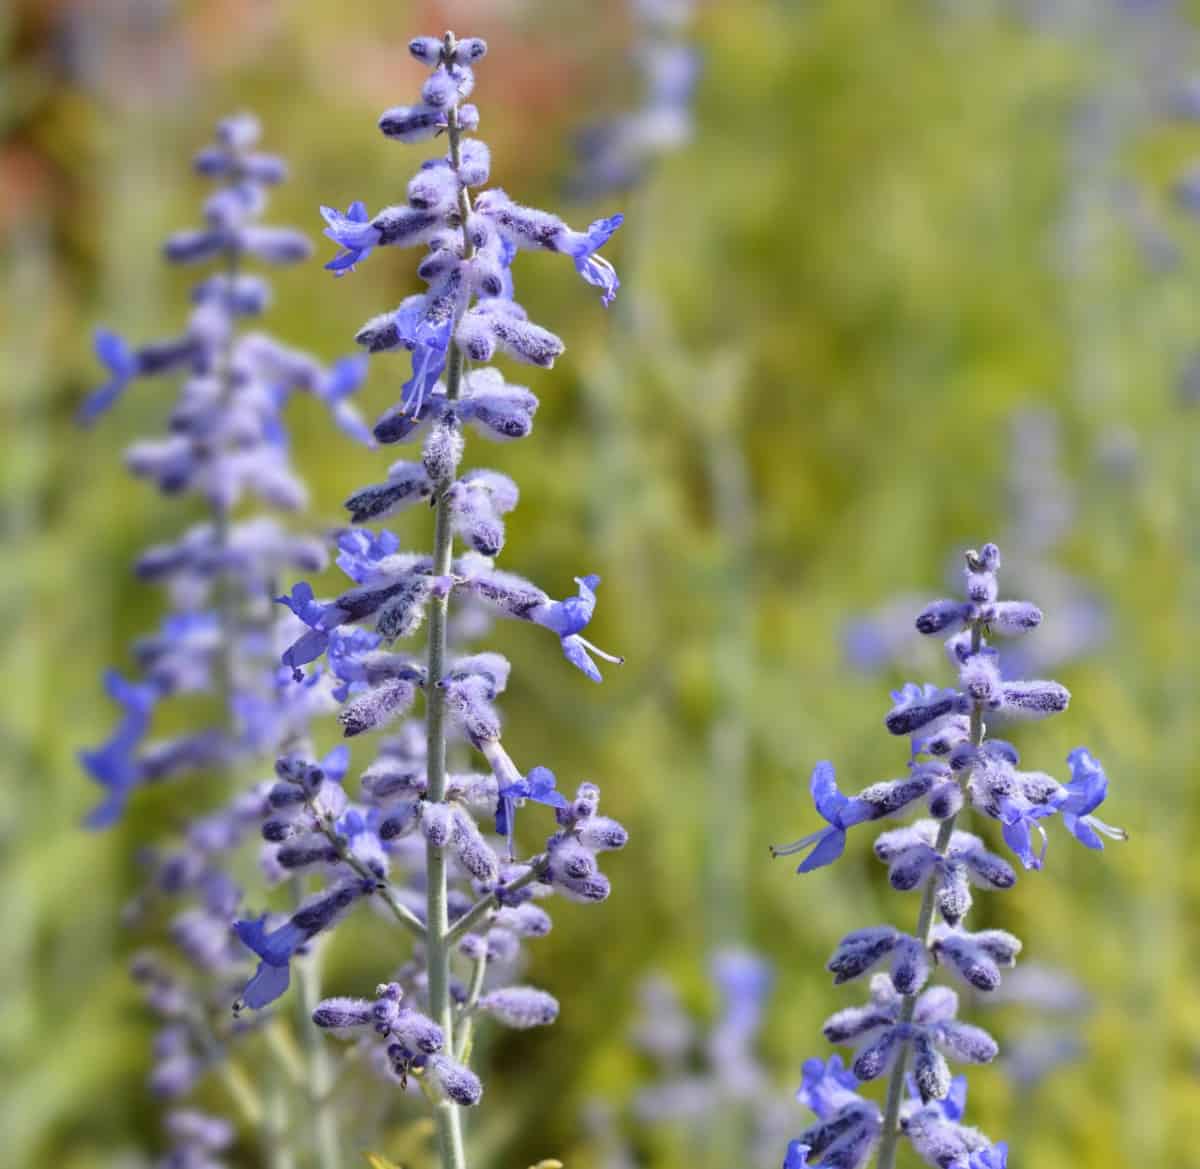 Russian sage is known for its silvery foliage as well as its flowers.